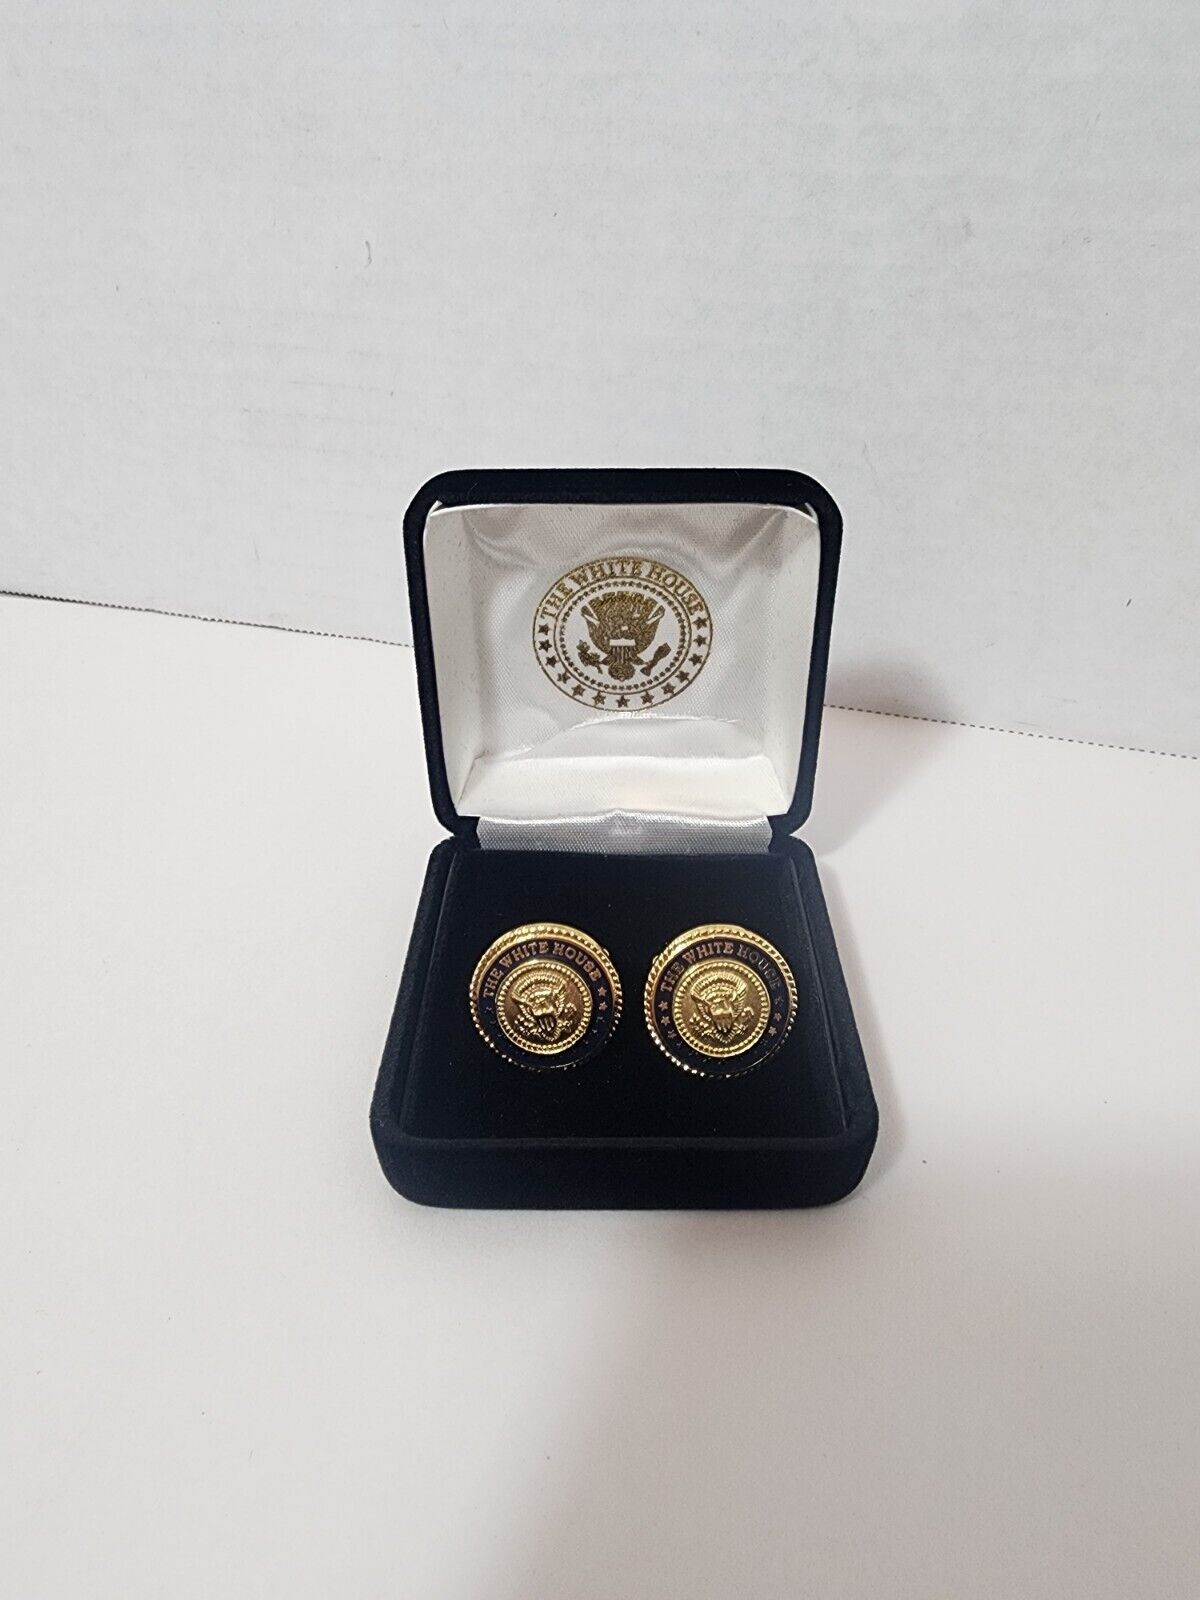 THE WHITE HOUSE CUFFLINKS 1 PAIR GOLD TONED